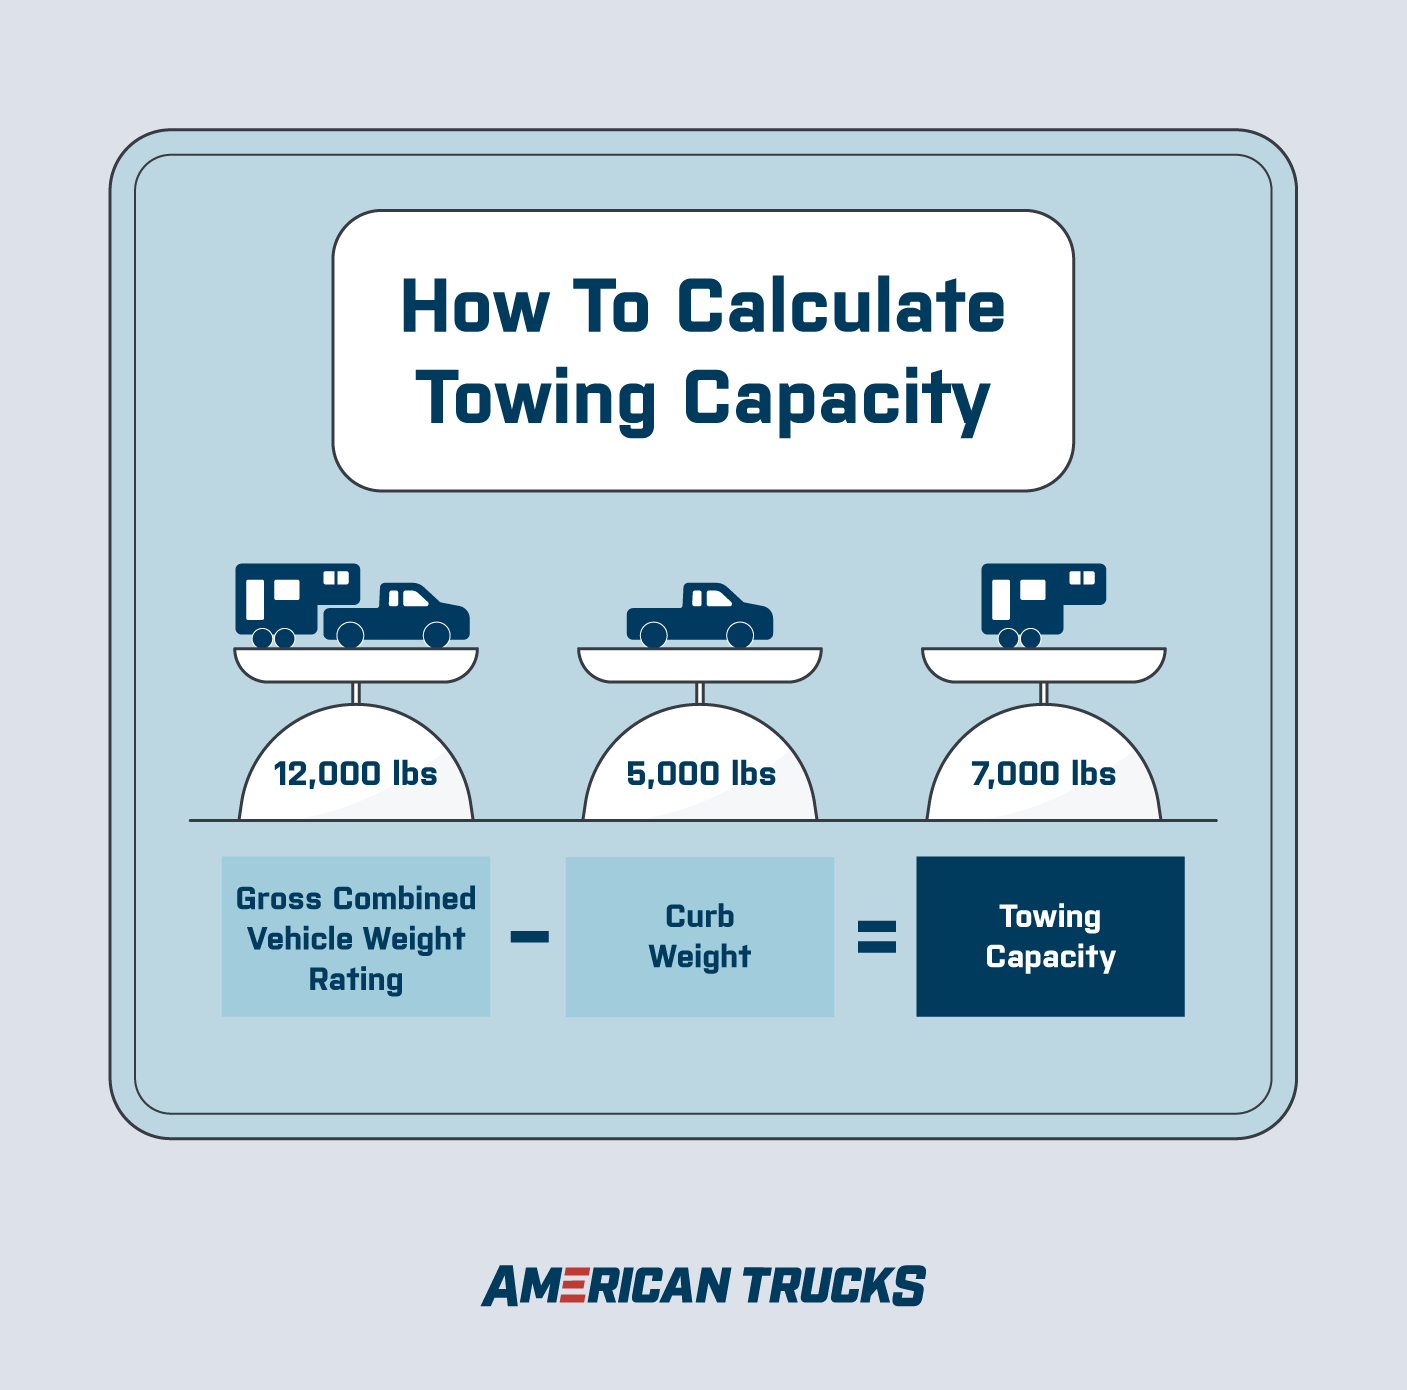 Illustration of pick up truck with trailer on a scale showing how to calculate towing capacity. 